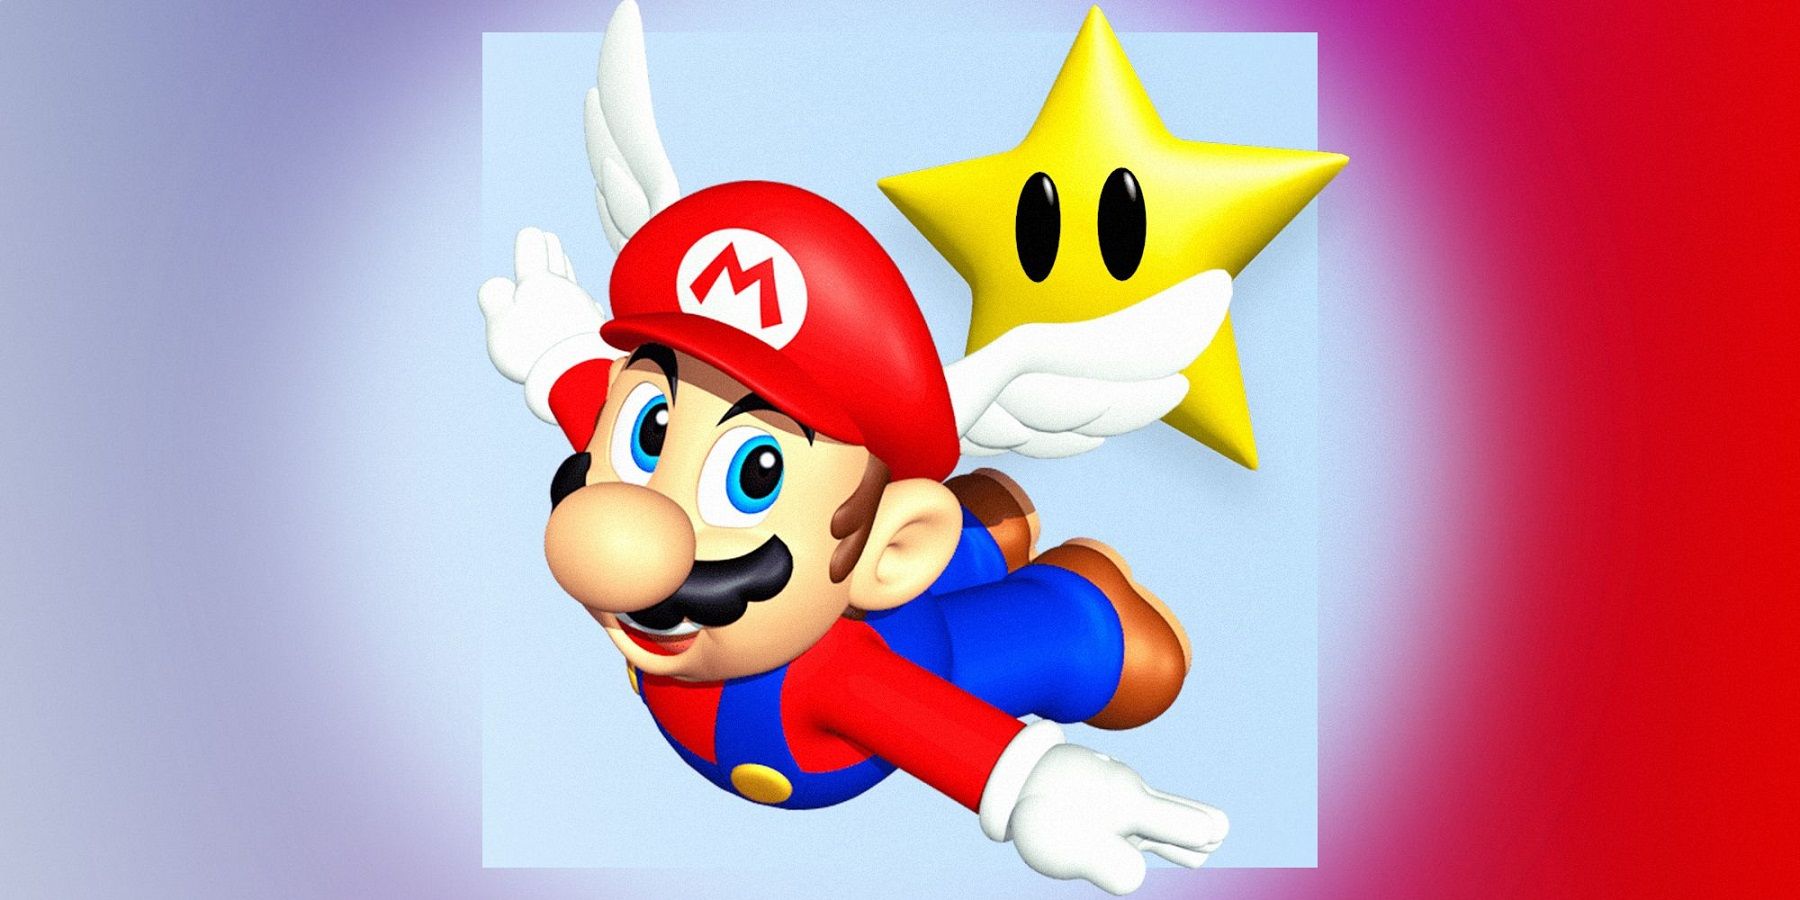 An image of Mario from Mario 64 with a star behind him.